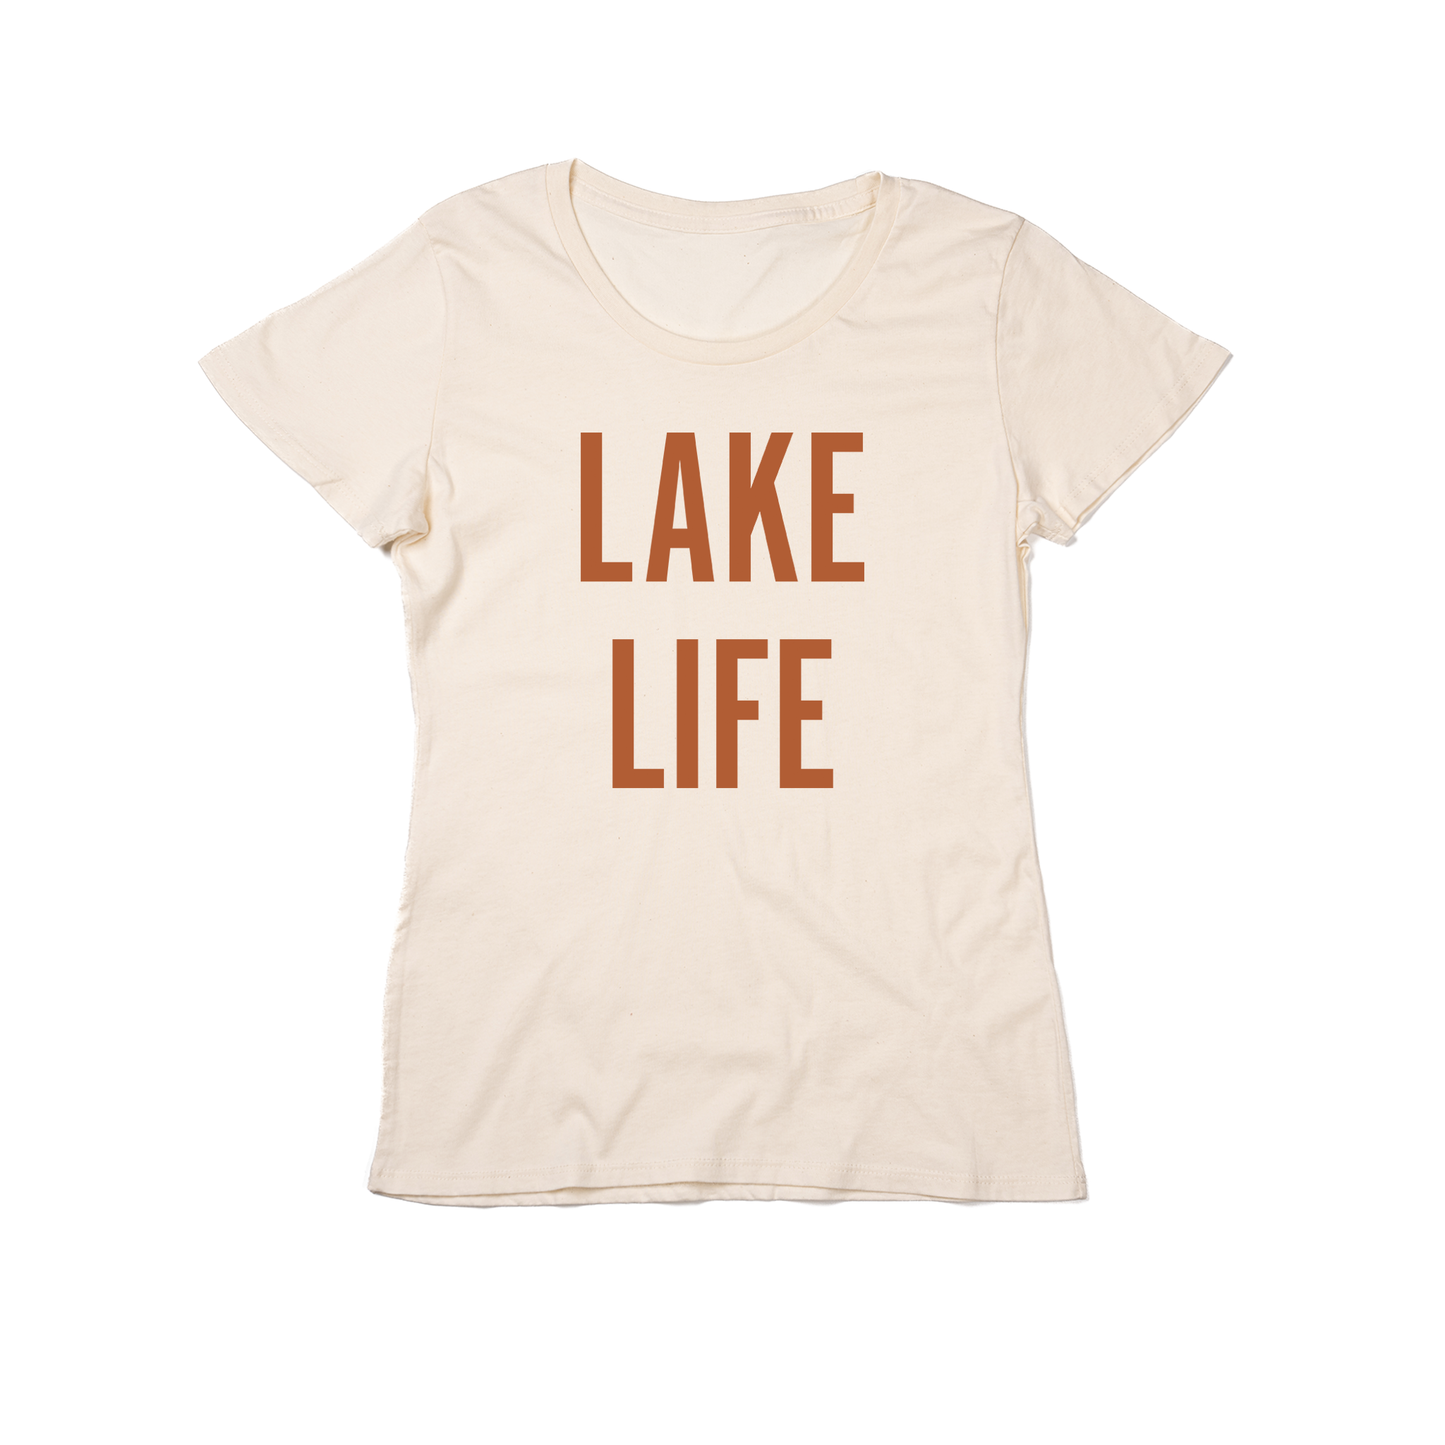 Lake Life (Rust) - Women's Fitted Tee (Natural)